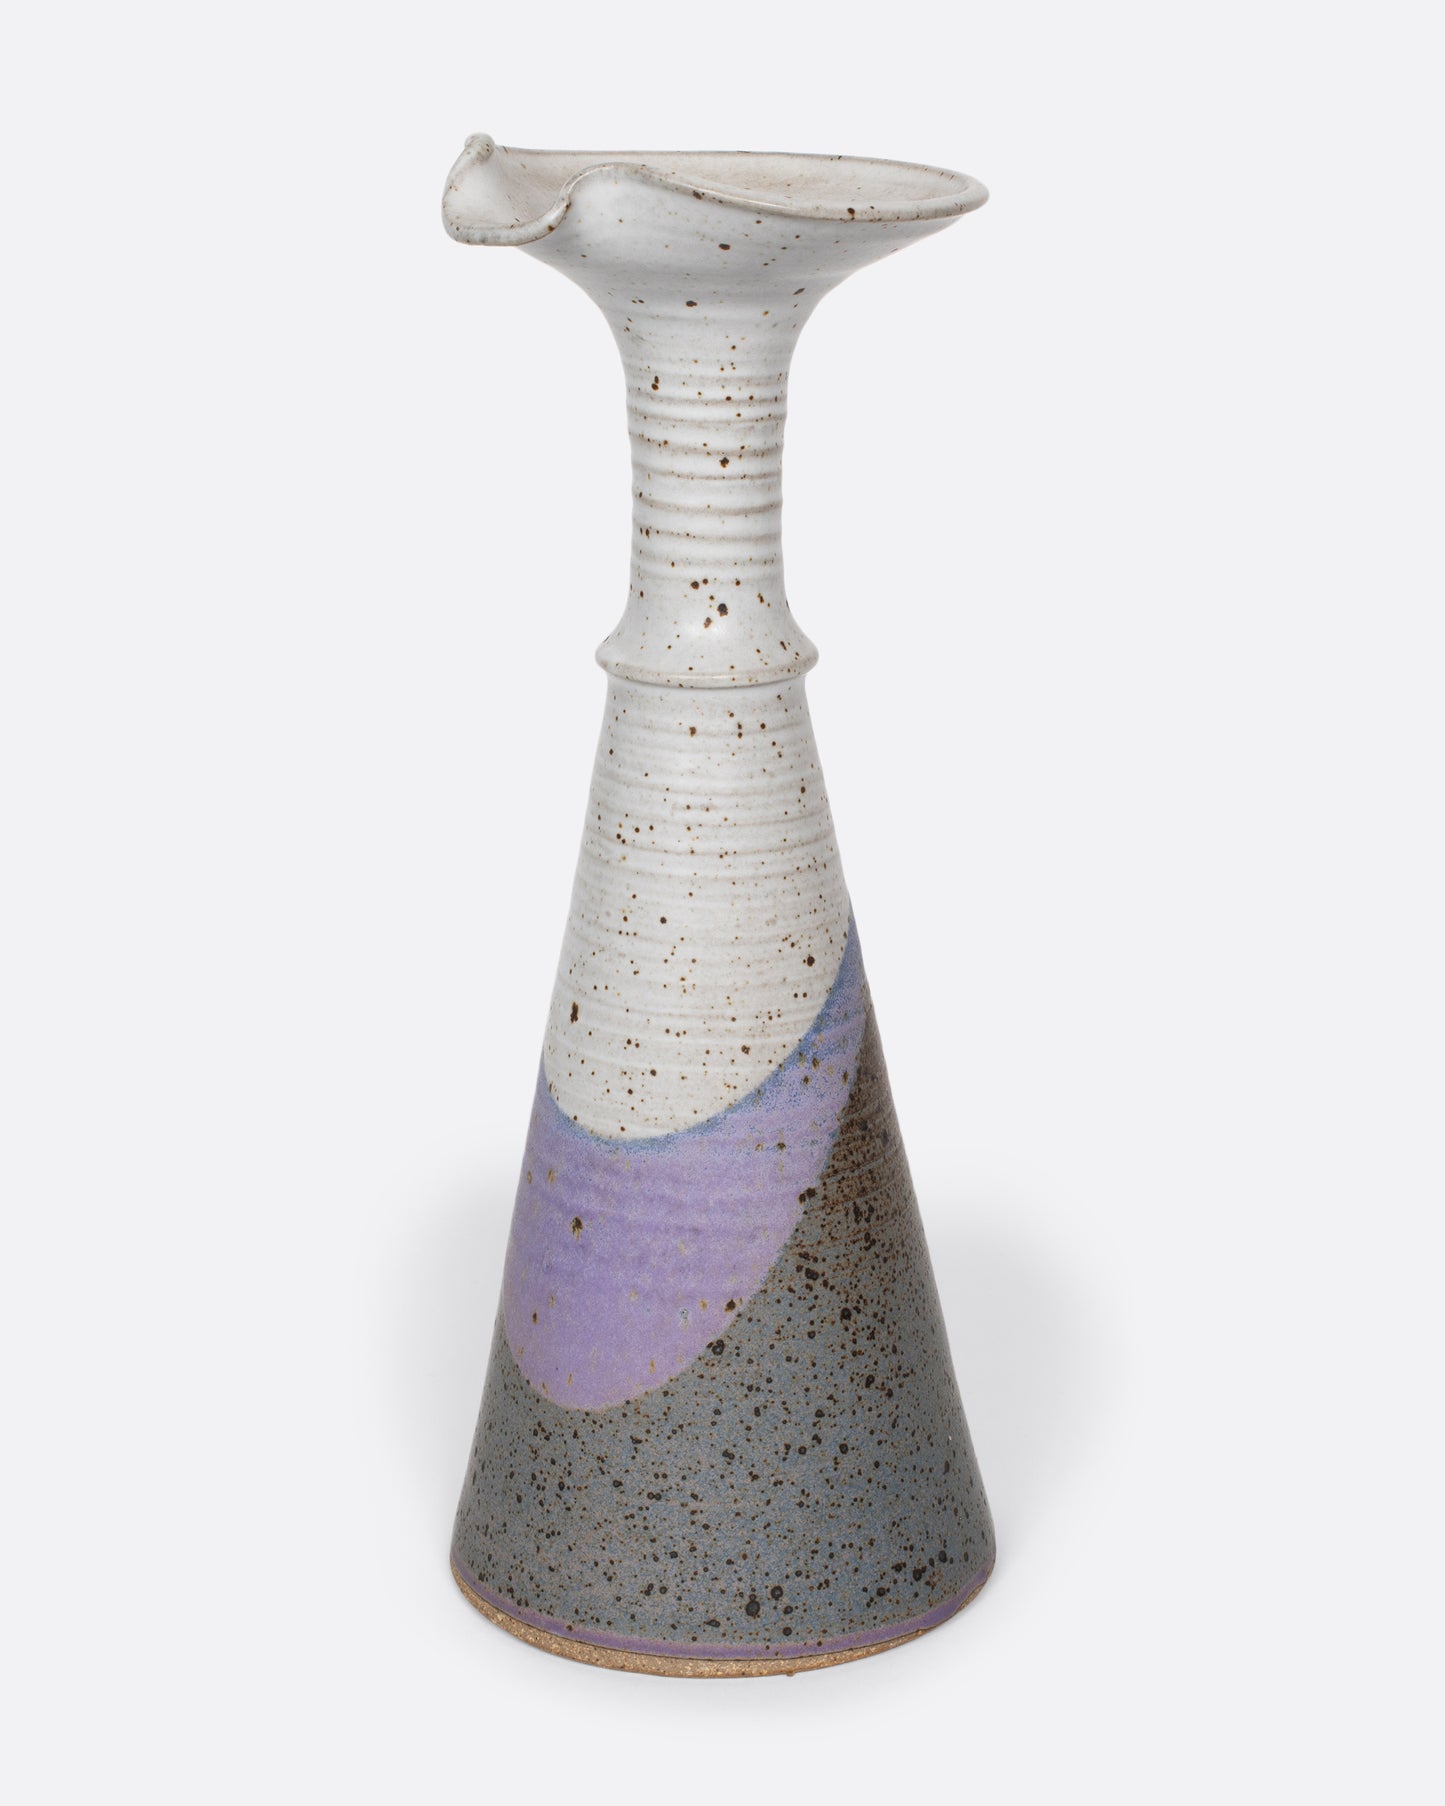 This vintage ceramic beauty can be used as a decanter or carafe and is perfect as the tallest piece on your tablescape.